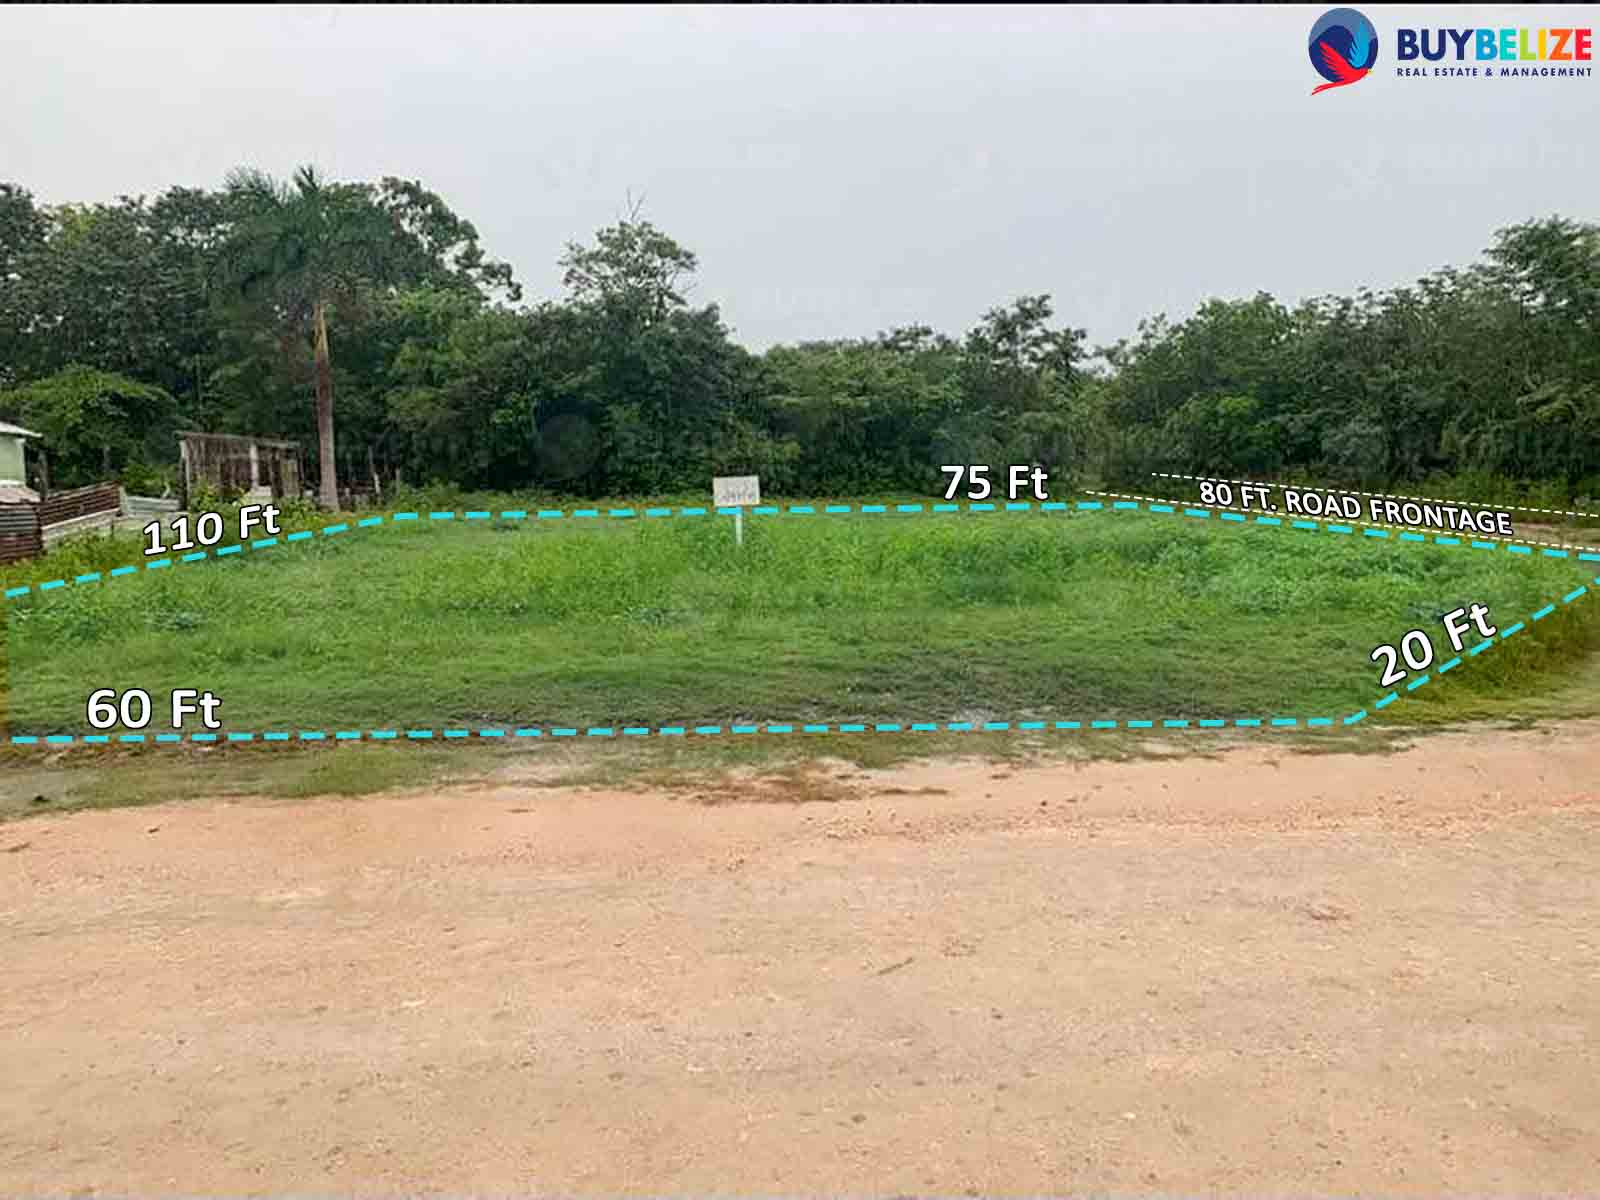 Large 7,900 Sq. Ft Land FOR SALE in the CONSEJO area, Corozal District Belize.